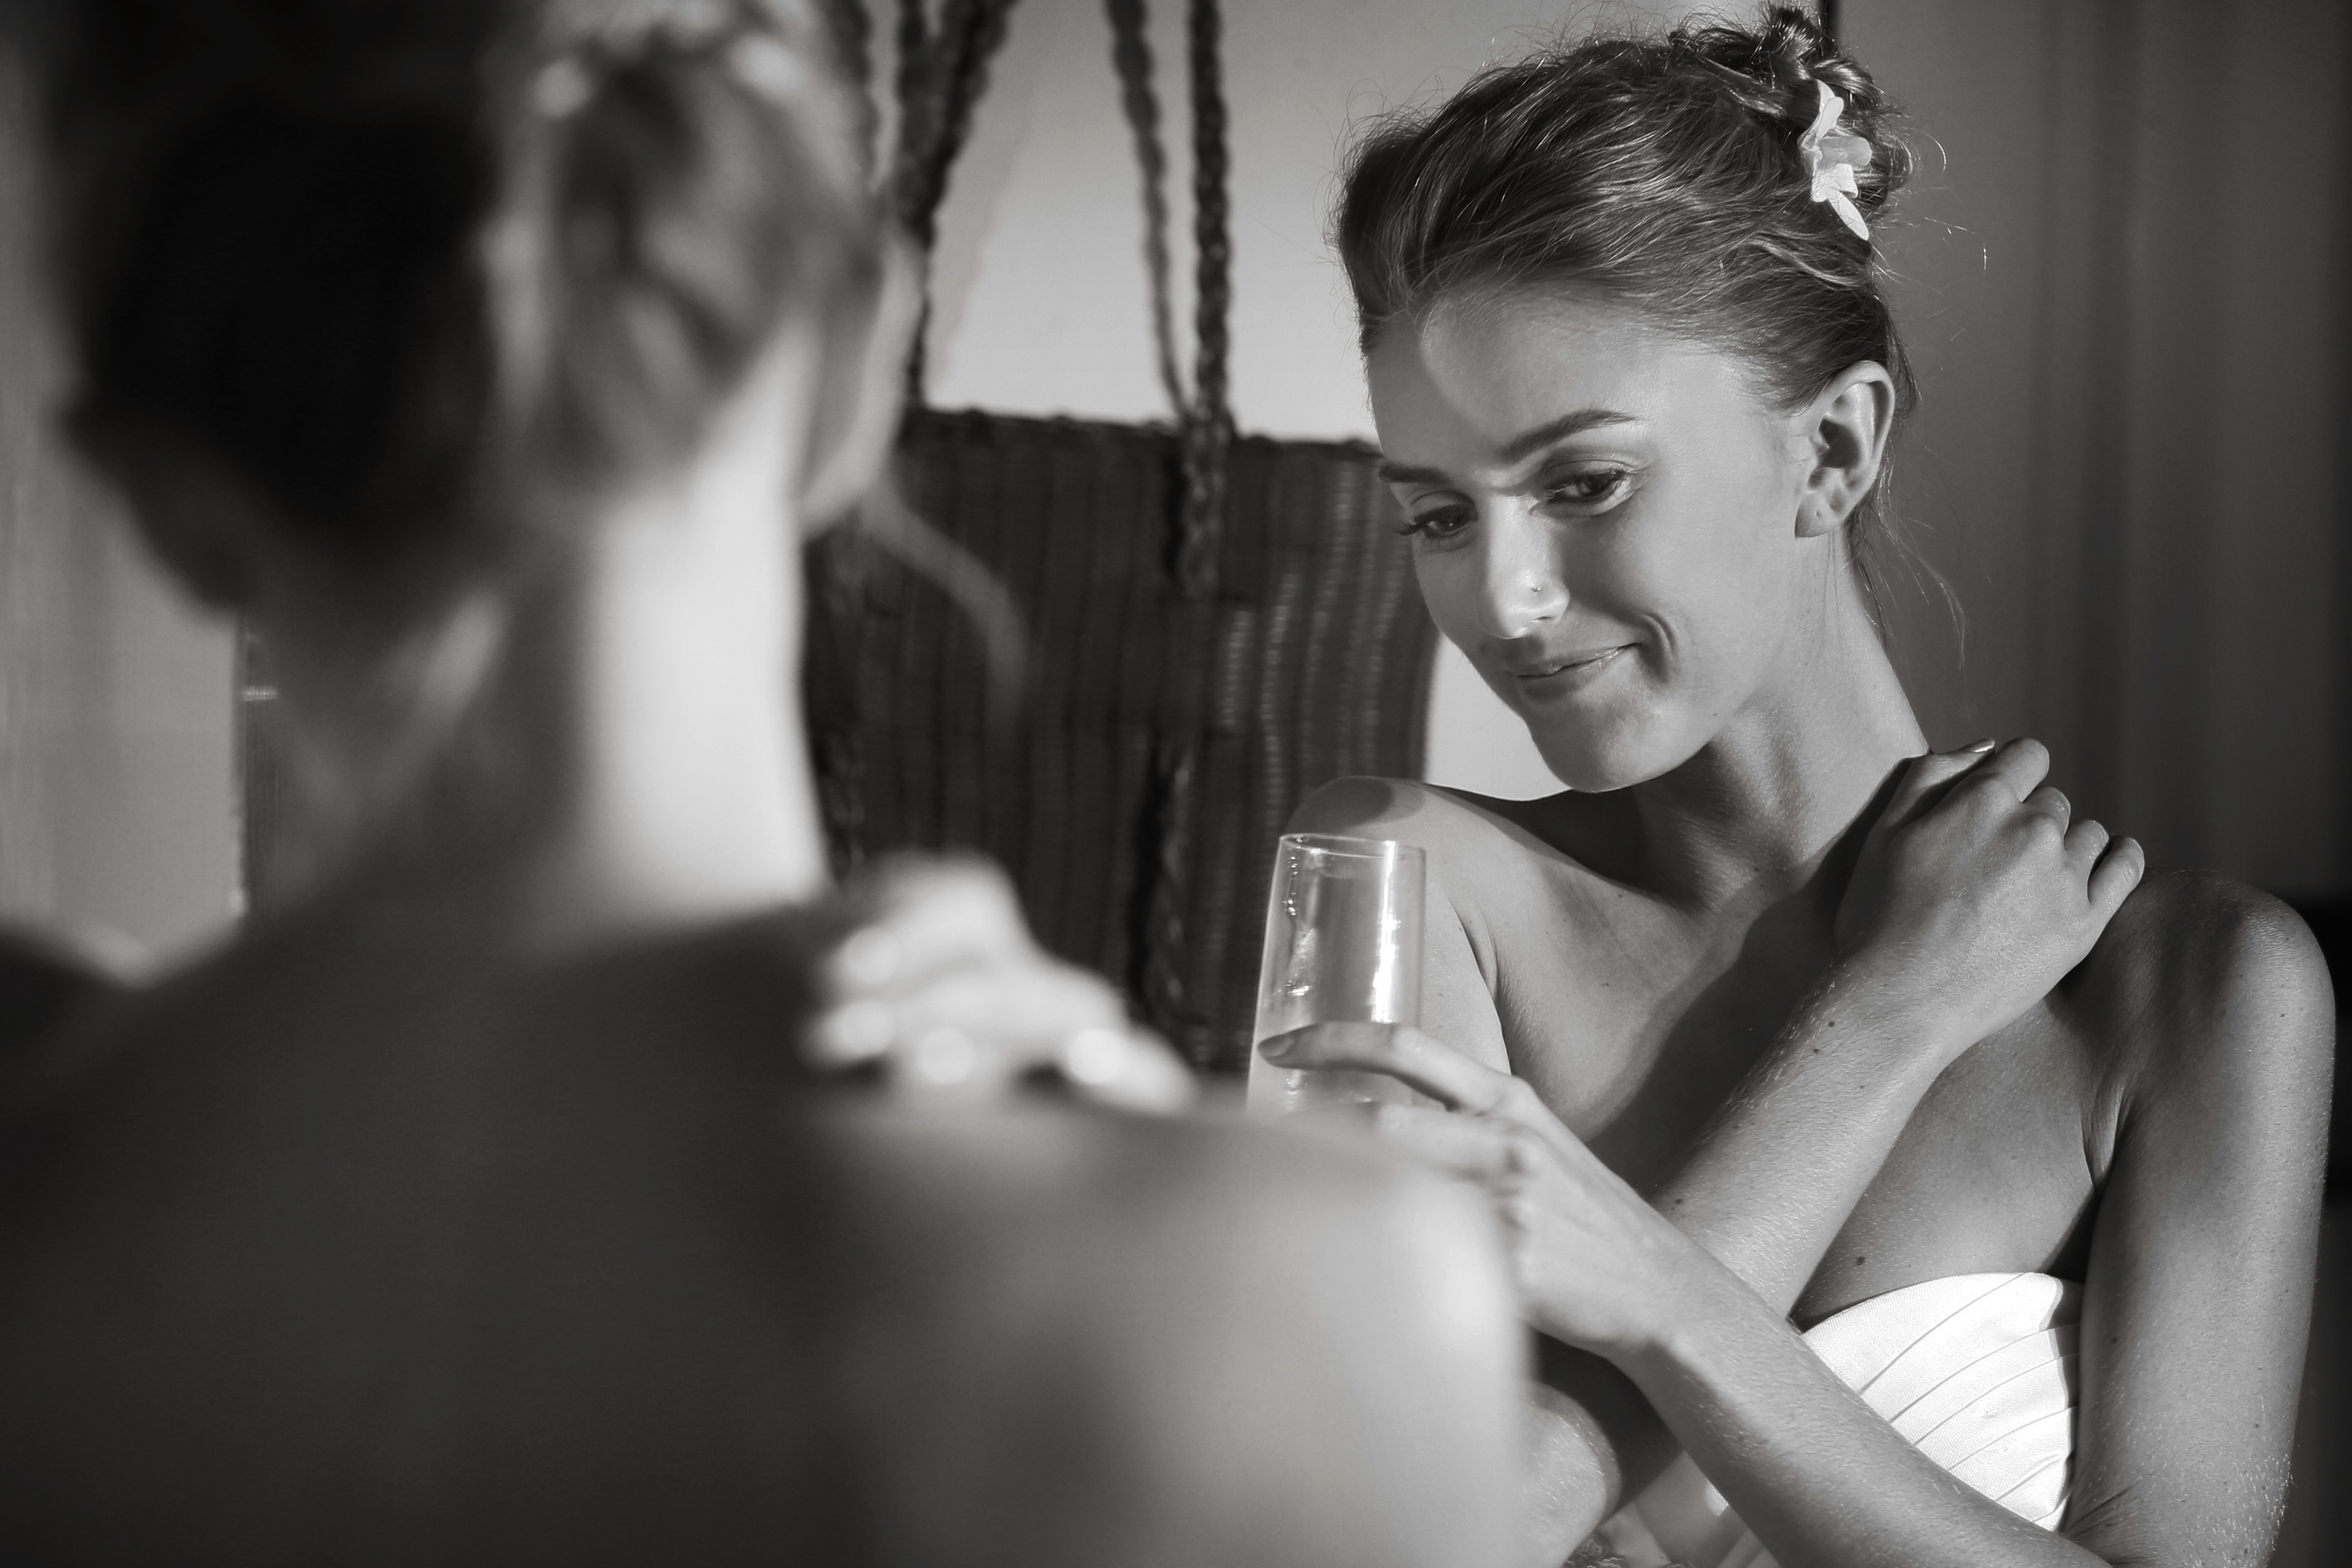 More information about "Bridal Beauty Tips to Looking Flawless on Your Wedding Day"